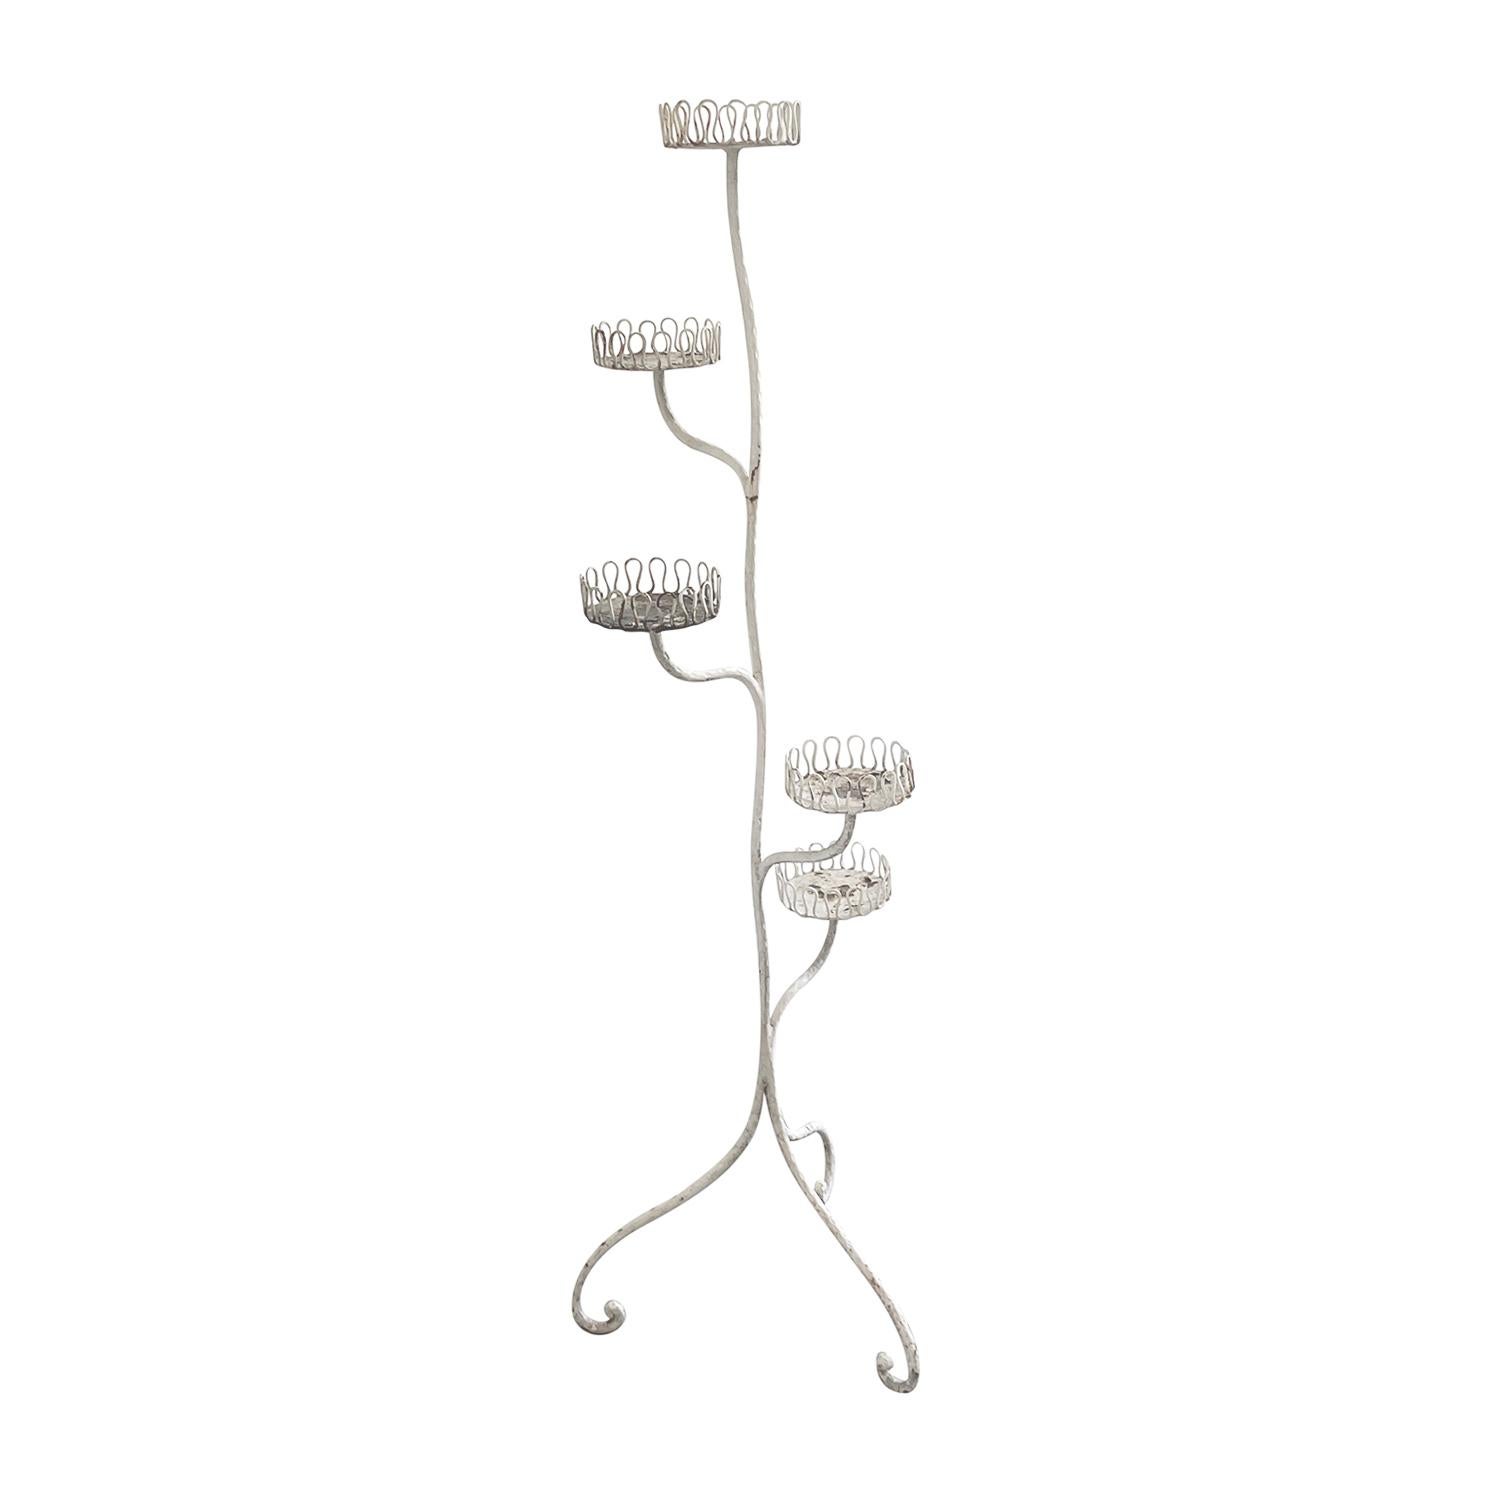 A white, vintage Italian plant stand with five plant holders, made of hand crafted forged metal in the Style of Gio Ponti, in good condition. The patinated stand is set on a scrolled tripod base. Minor fading, due to age. Wear consistent with age